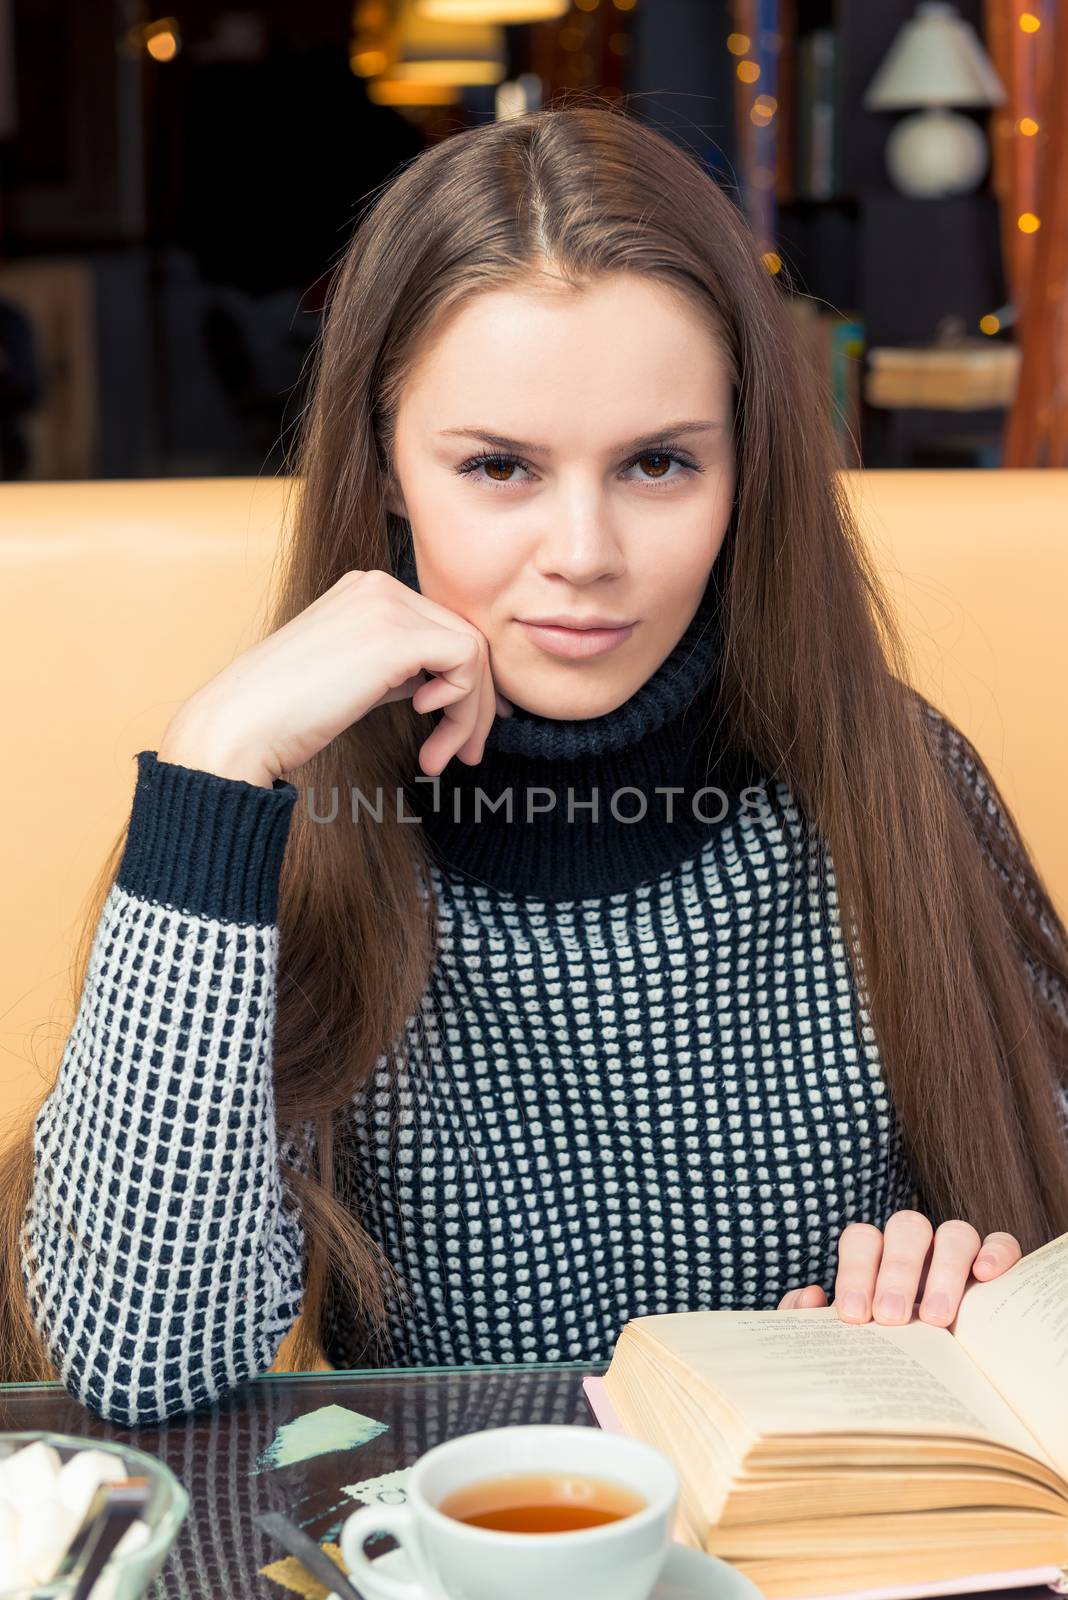 Smiling beautiful girl with book posing in cafe